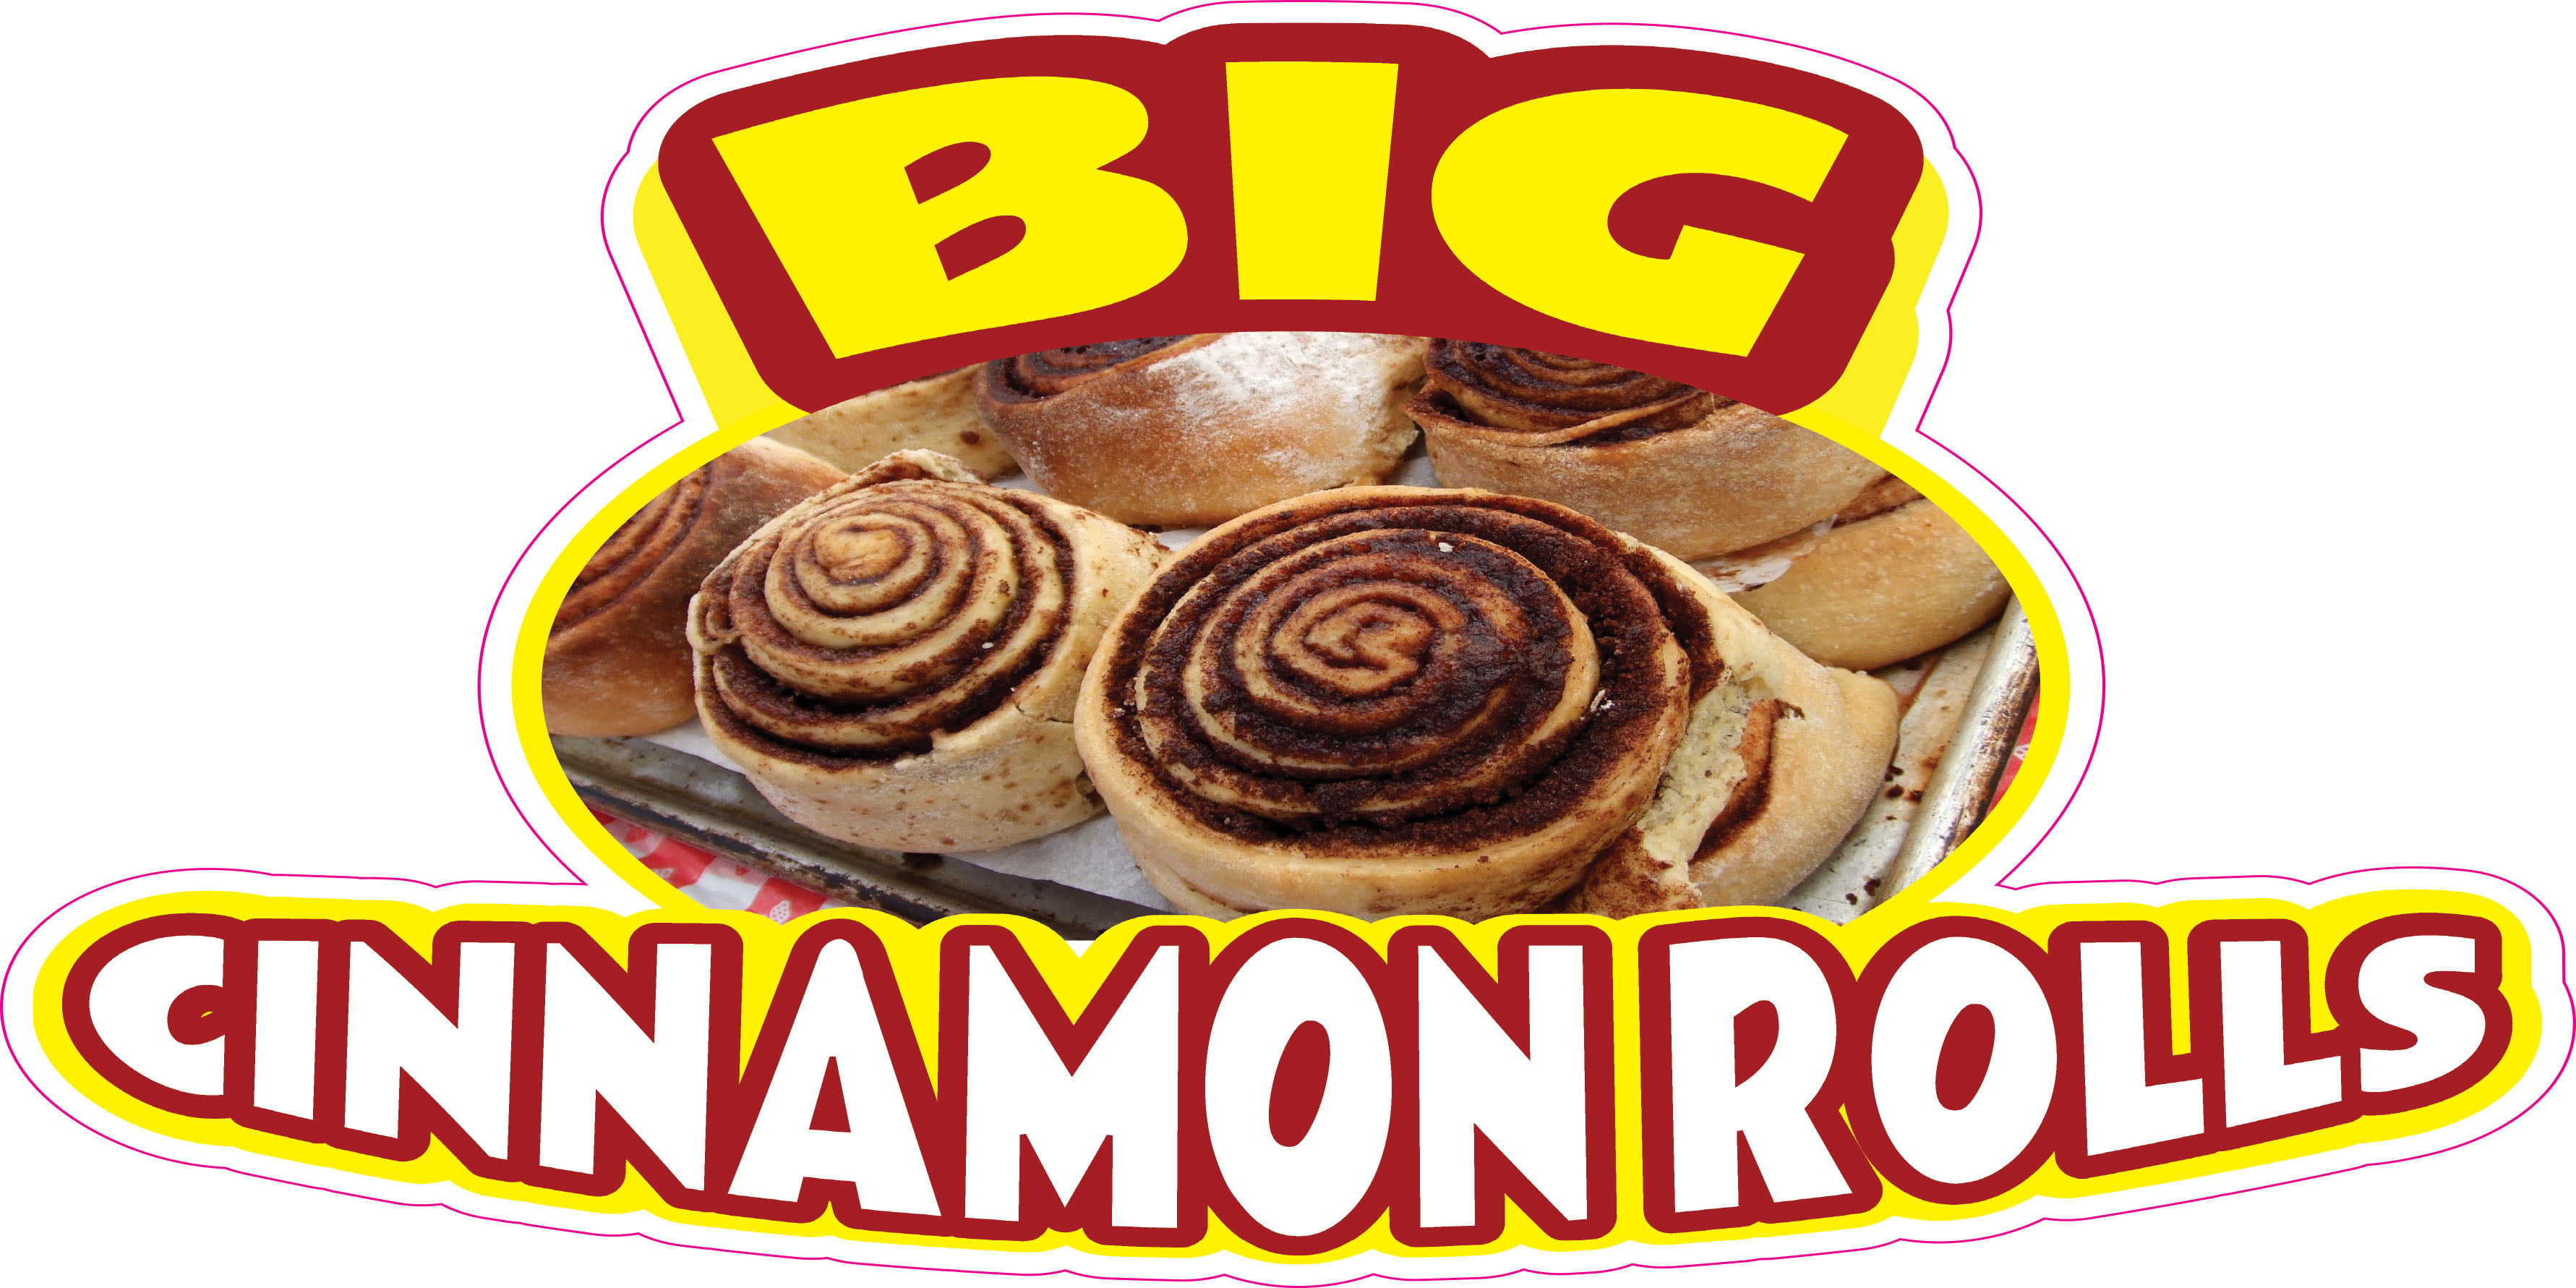 CHOOSE YOUR SIZE Cinnamon Rolls DECAL Concession Food Truck Vinyl Sticker 